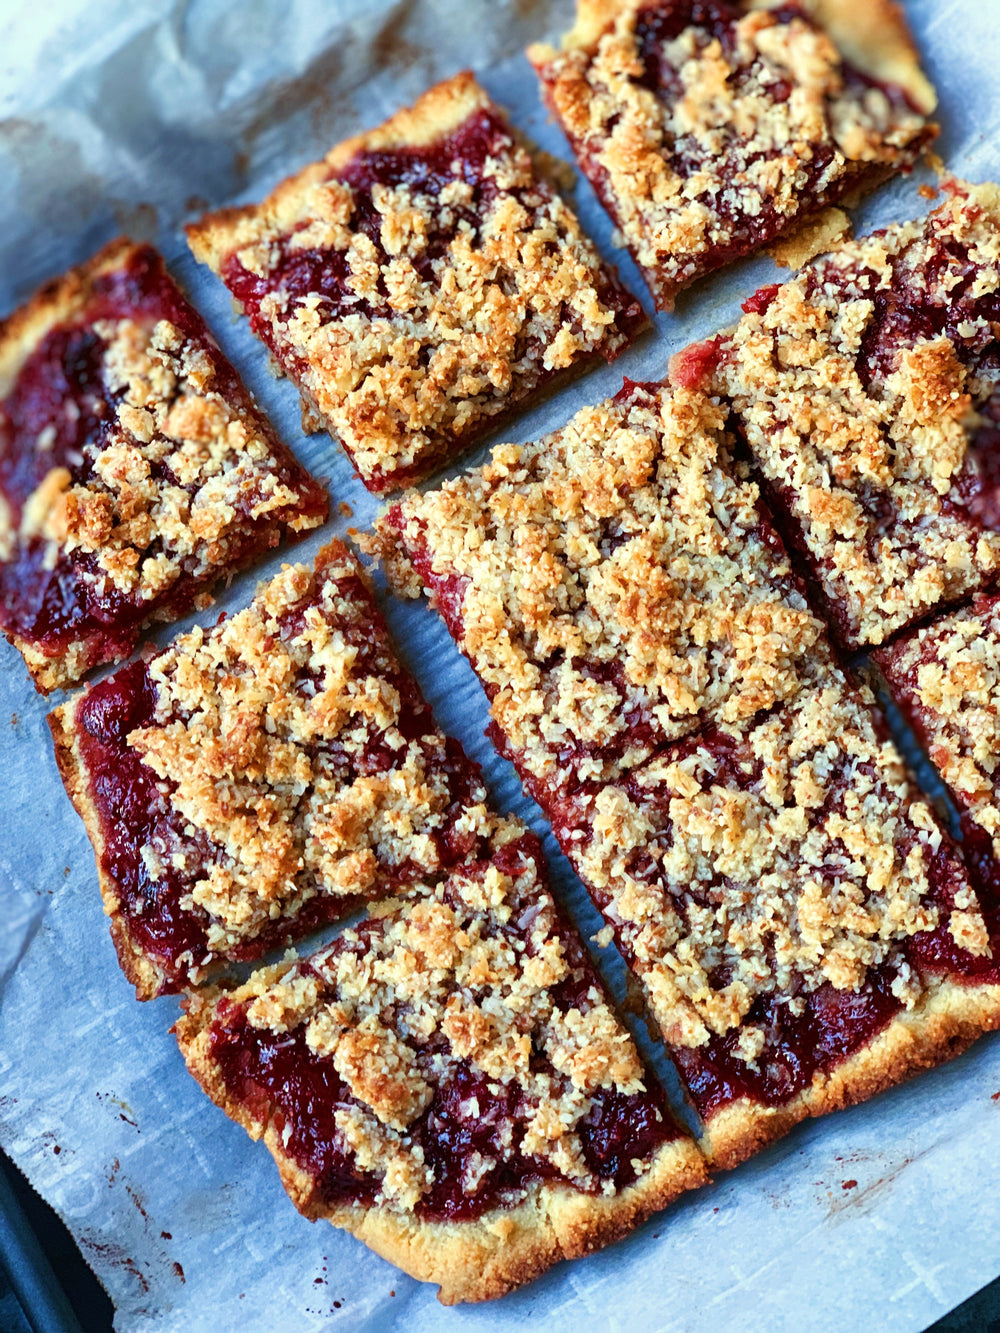 STRAWBERRY JAM CRUMBLE BARS W/ A PIE CRUST - Tasty As Fit